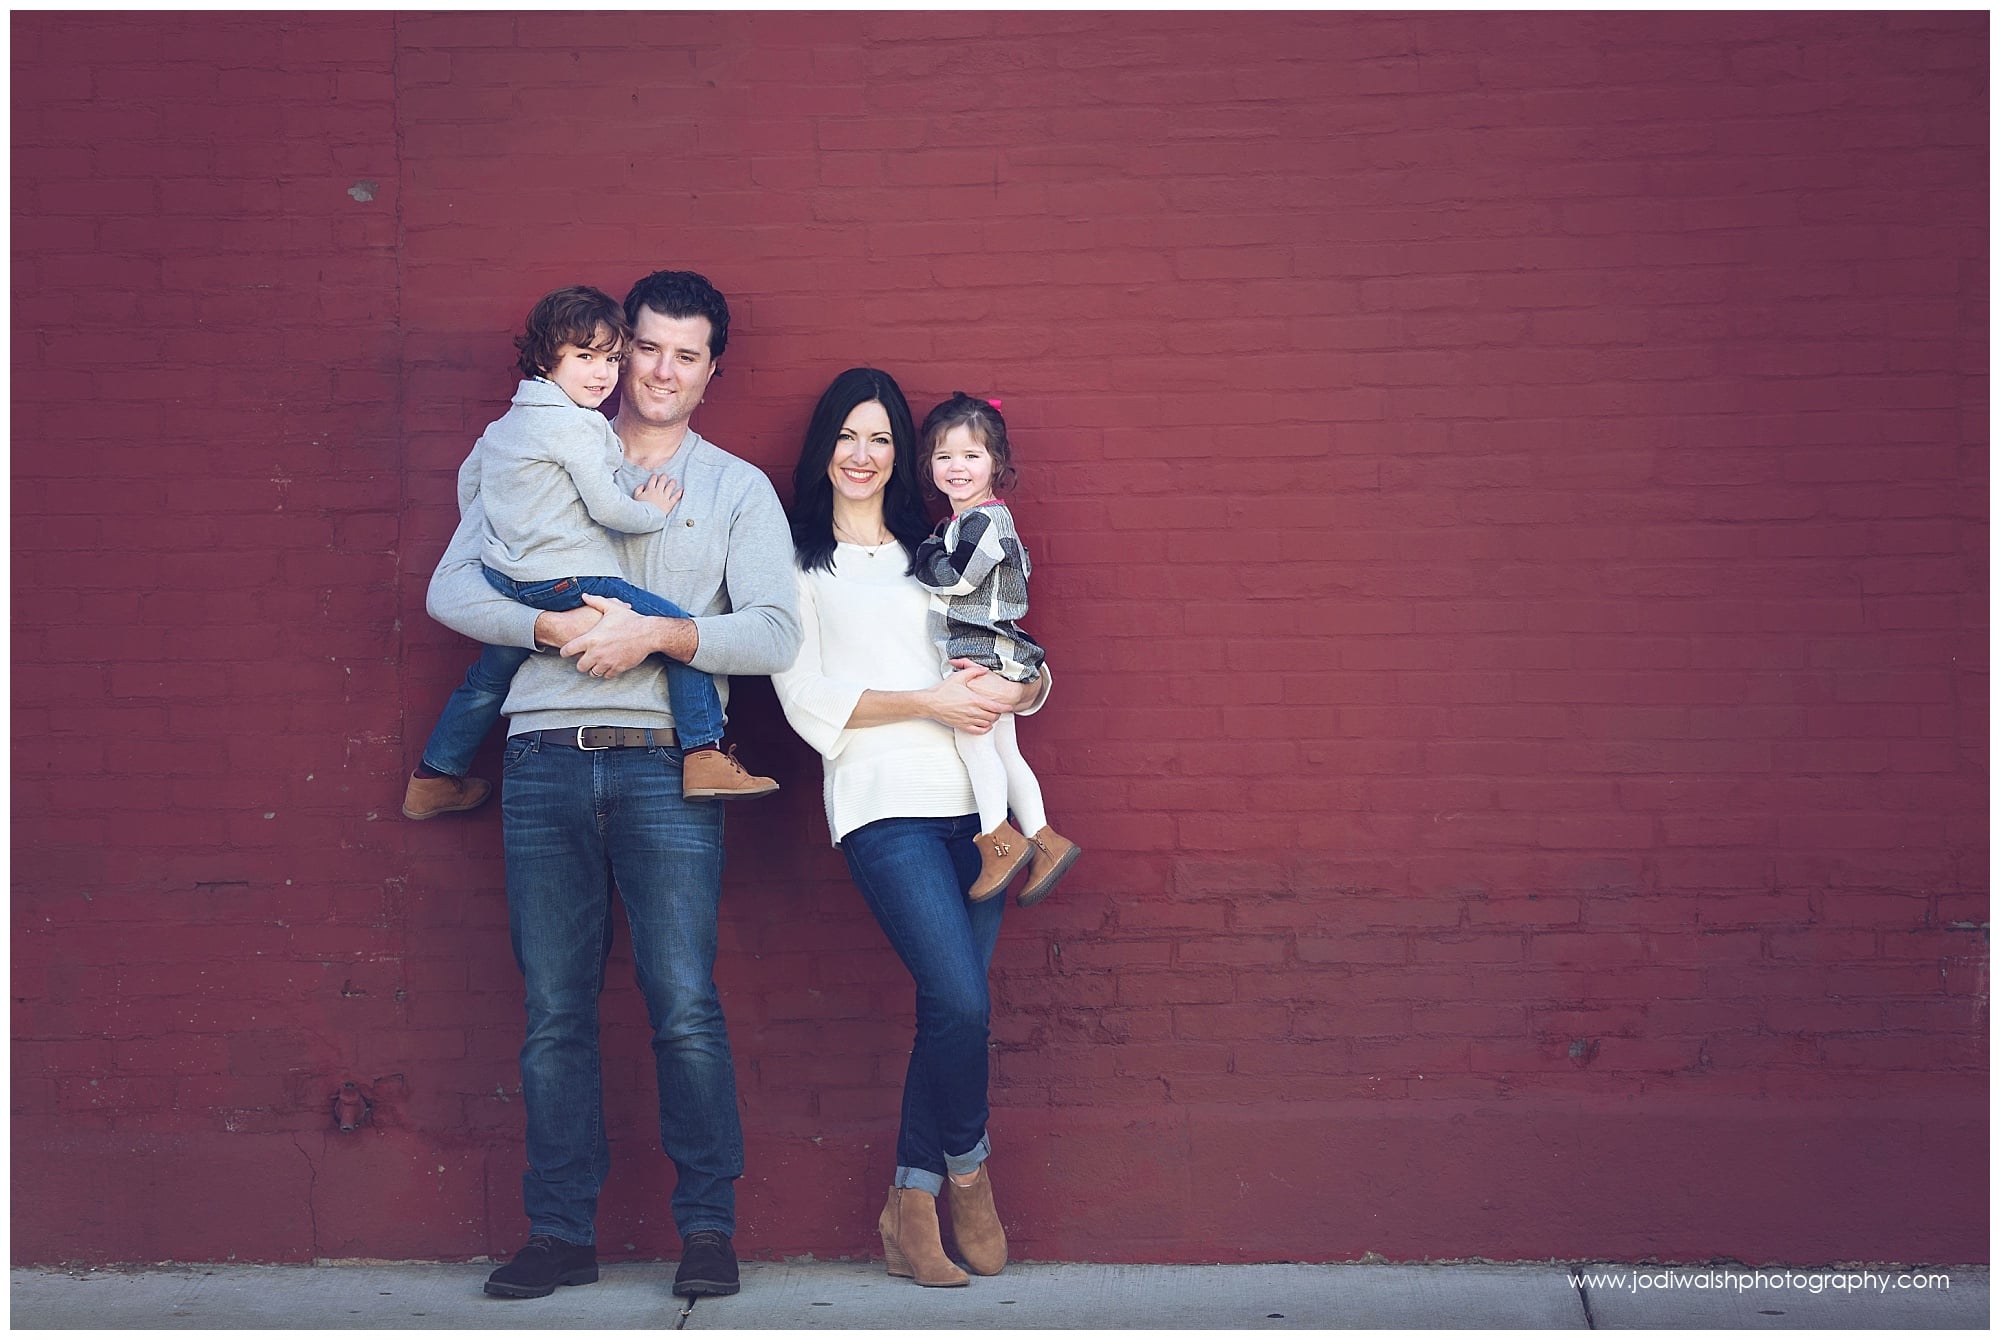 family portrait against a red brick wall